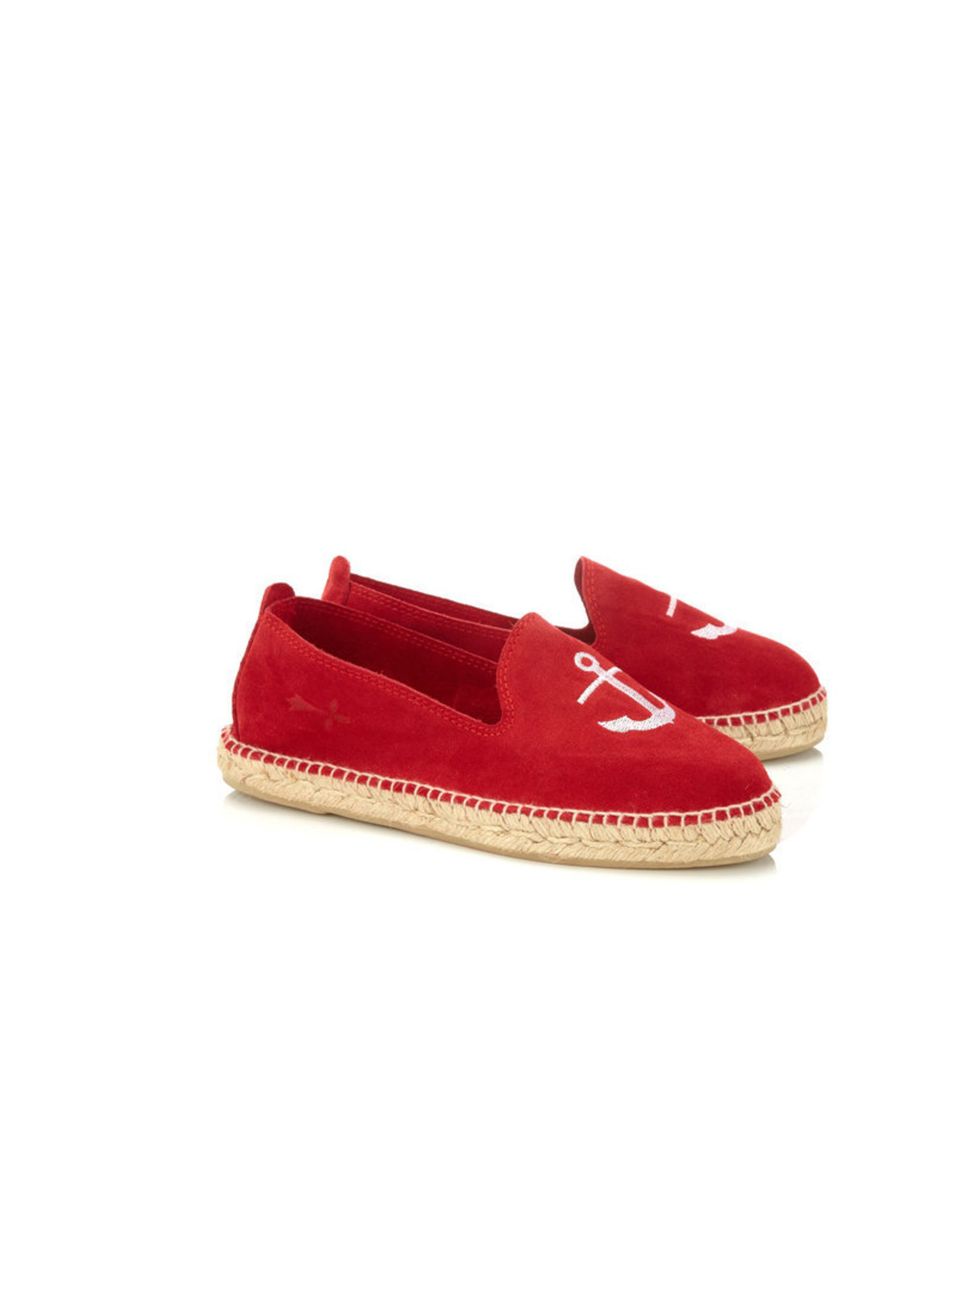 <p>It doesn't get more literal than this. </p><p>Manebi espadrilles, £70, from <a href="http://www.matchesfashion.com/product/191216">Avenue32.com</a></p>